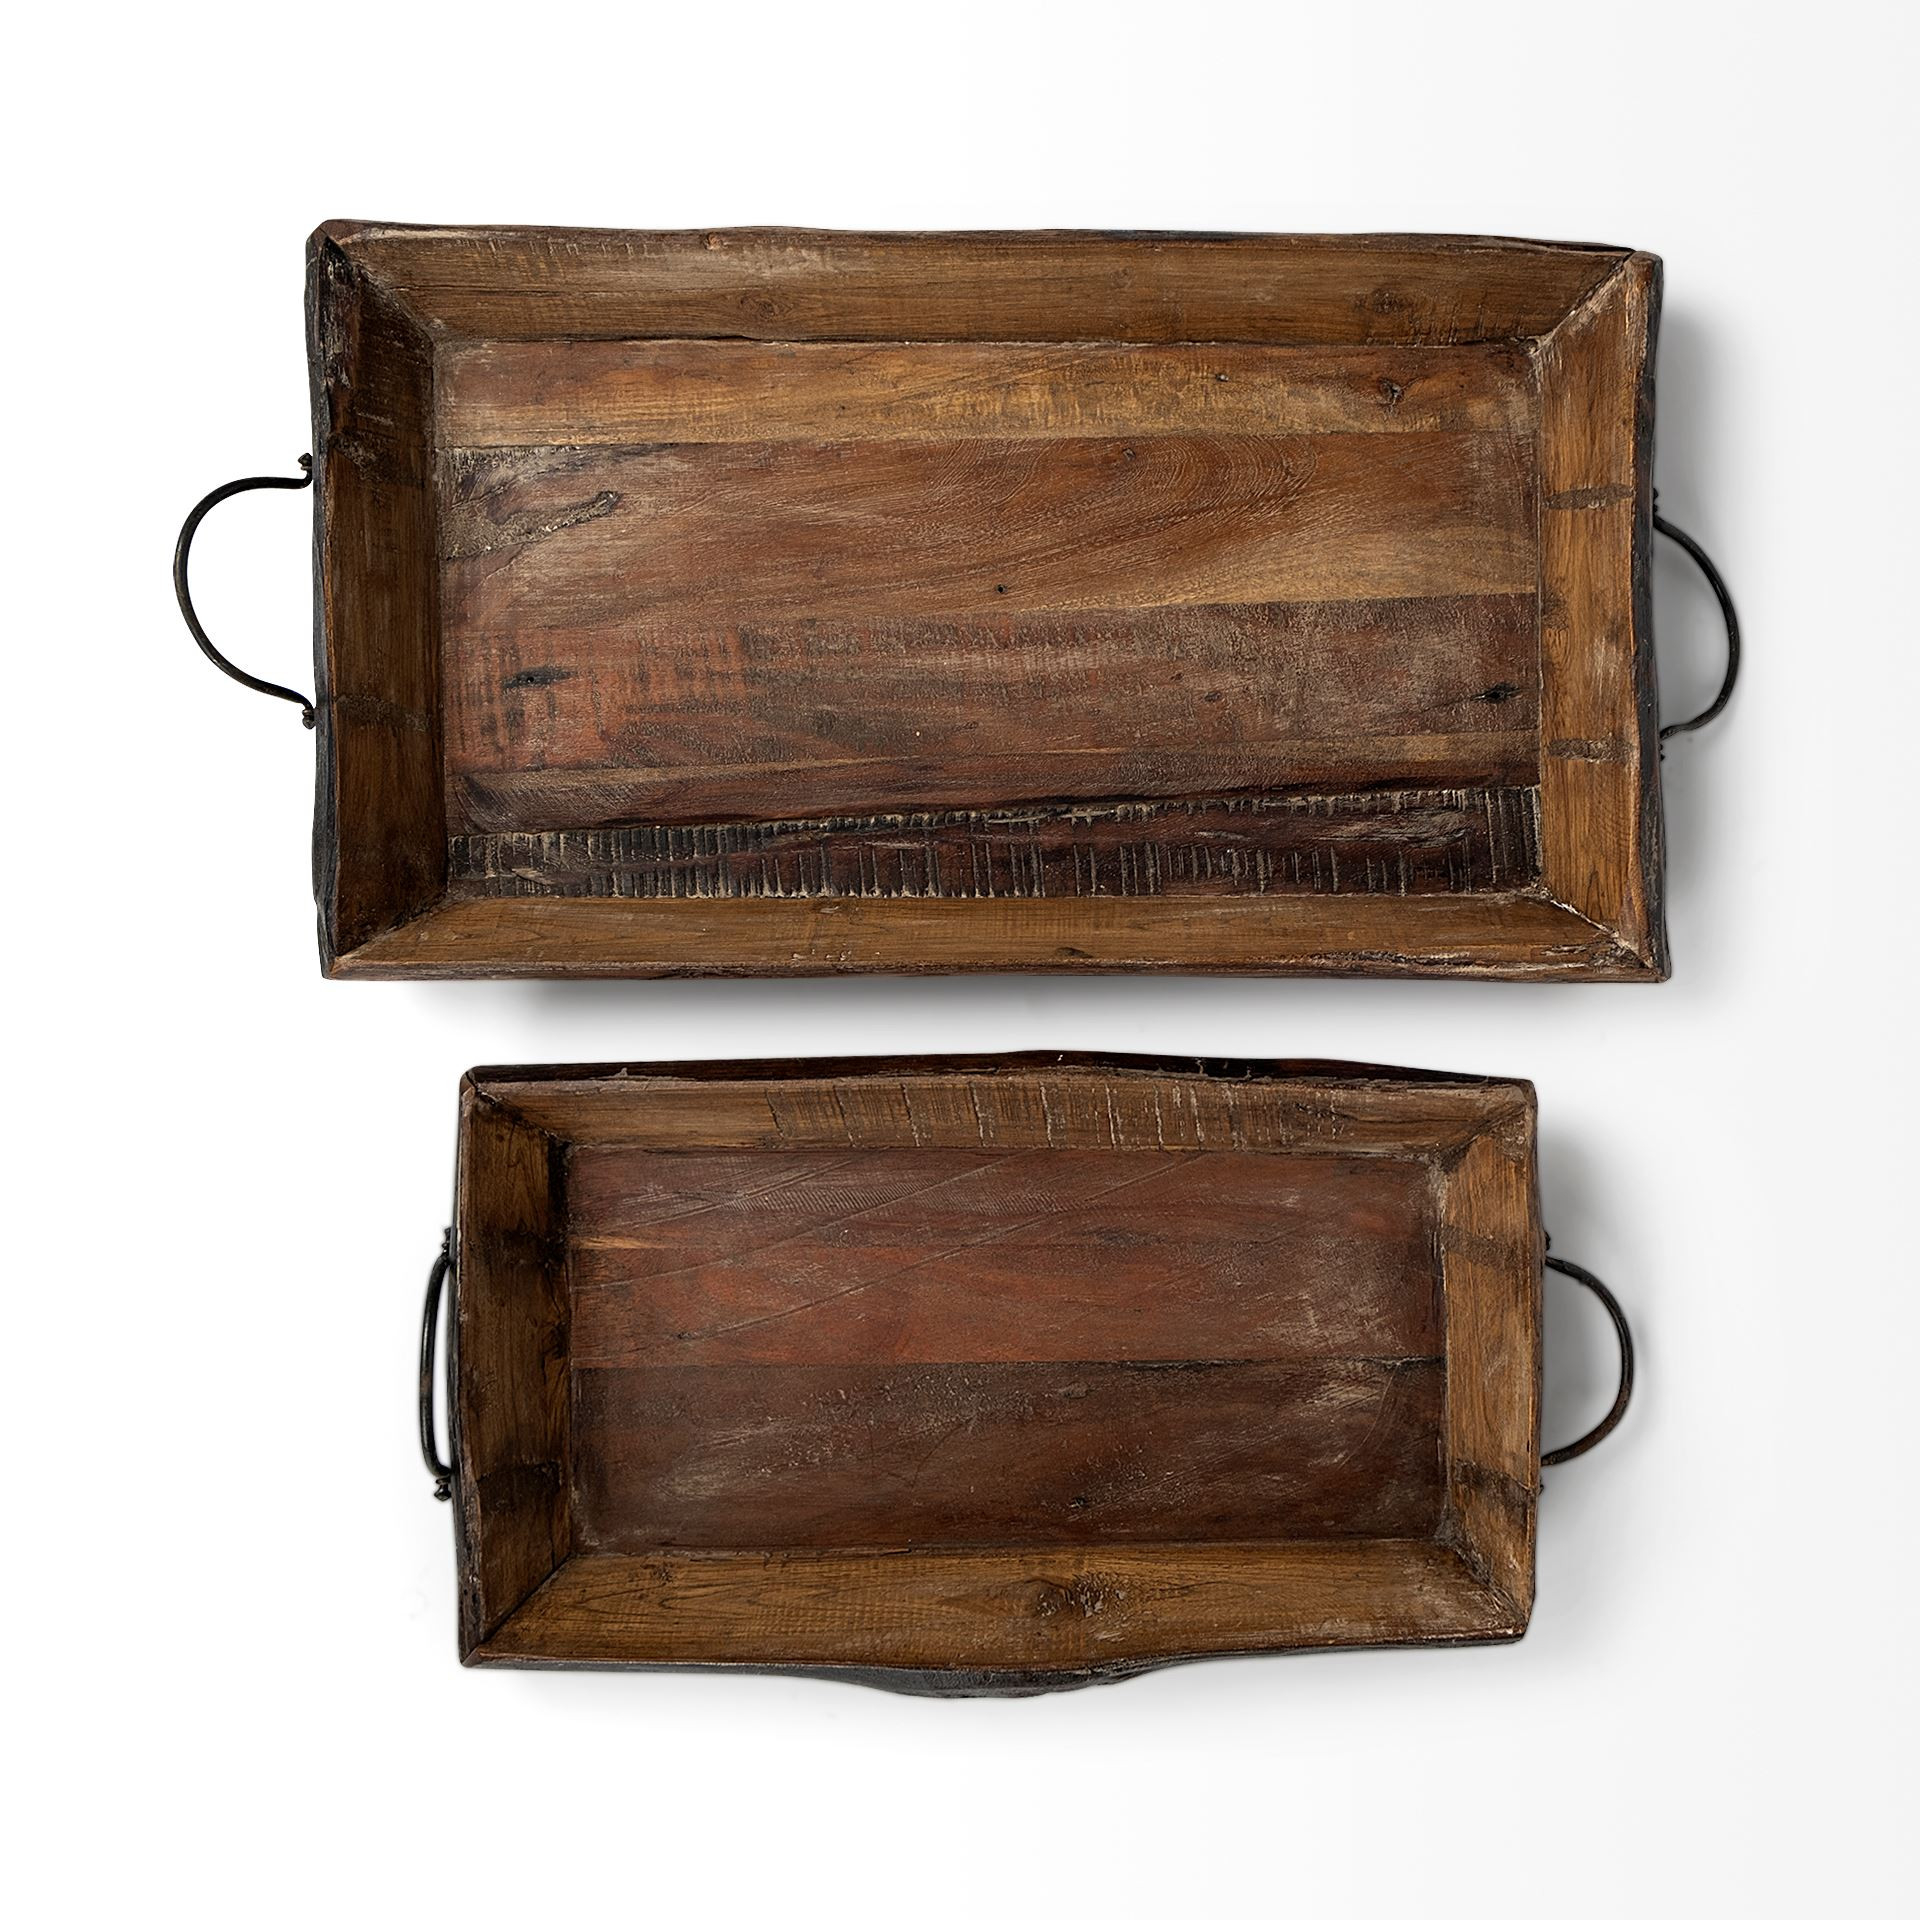 S/2 Medium Brown Recycled Wood With Flaunt Metal Handles Trays